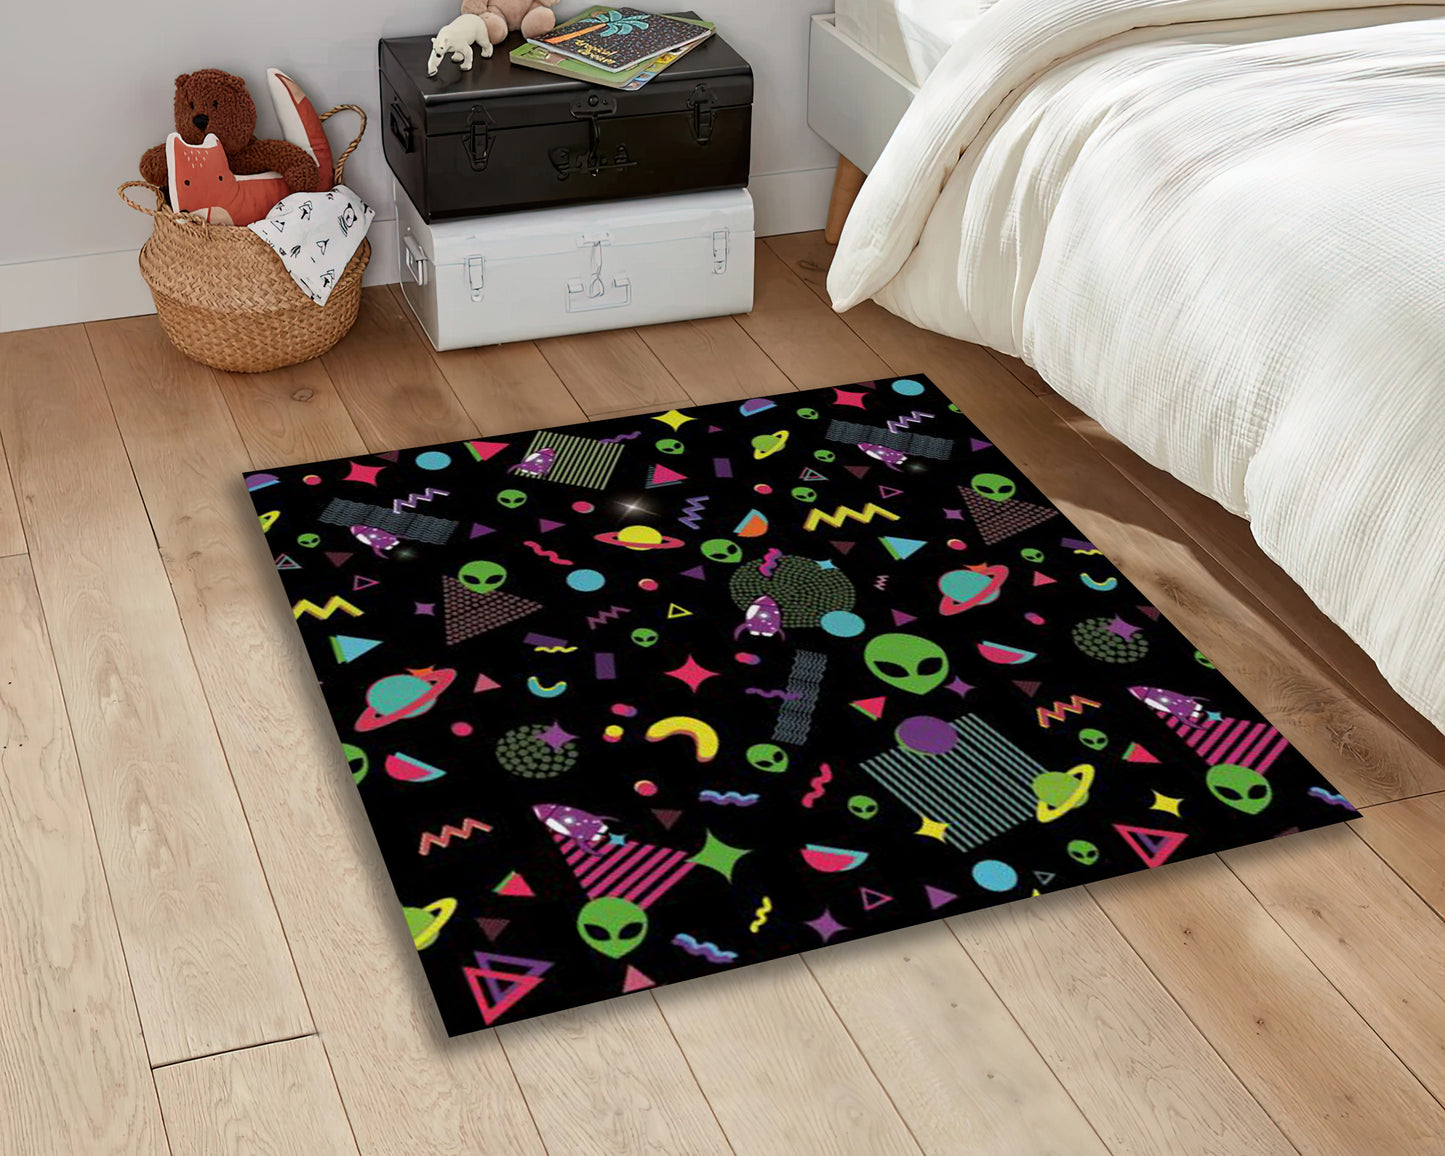 Space Arcade Game Rug, Alien Patterned Gamer Carpet, Galaxy Gaming Mat, Play Room Decor